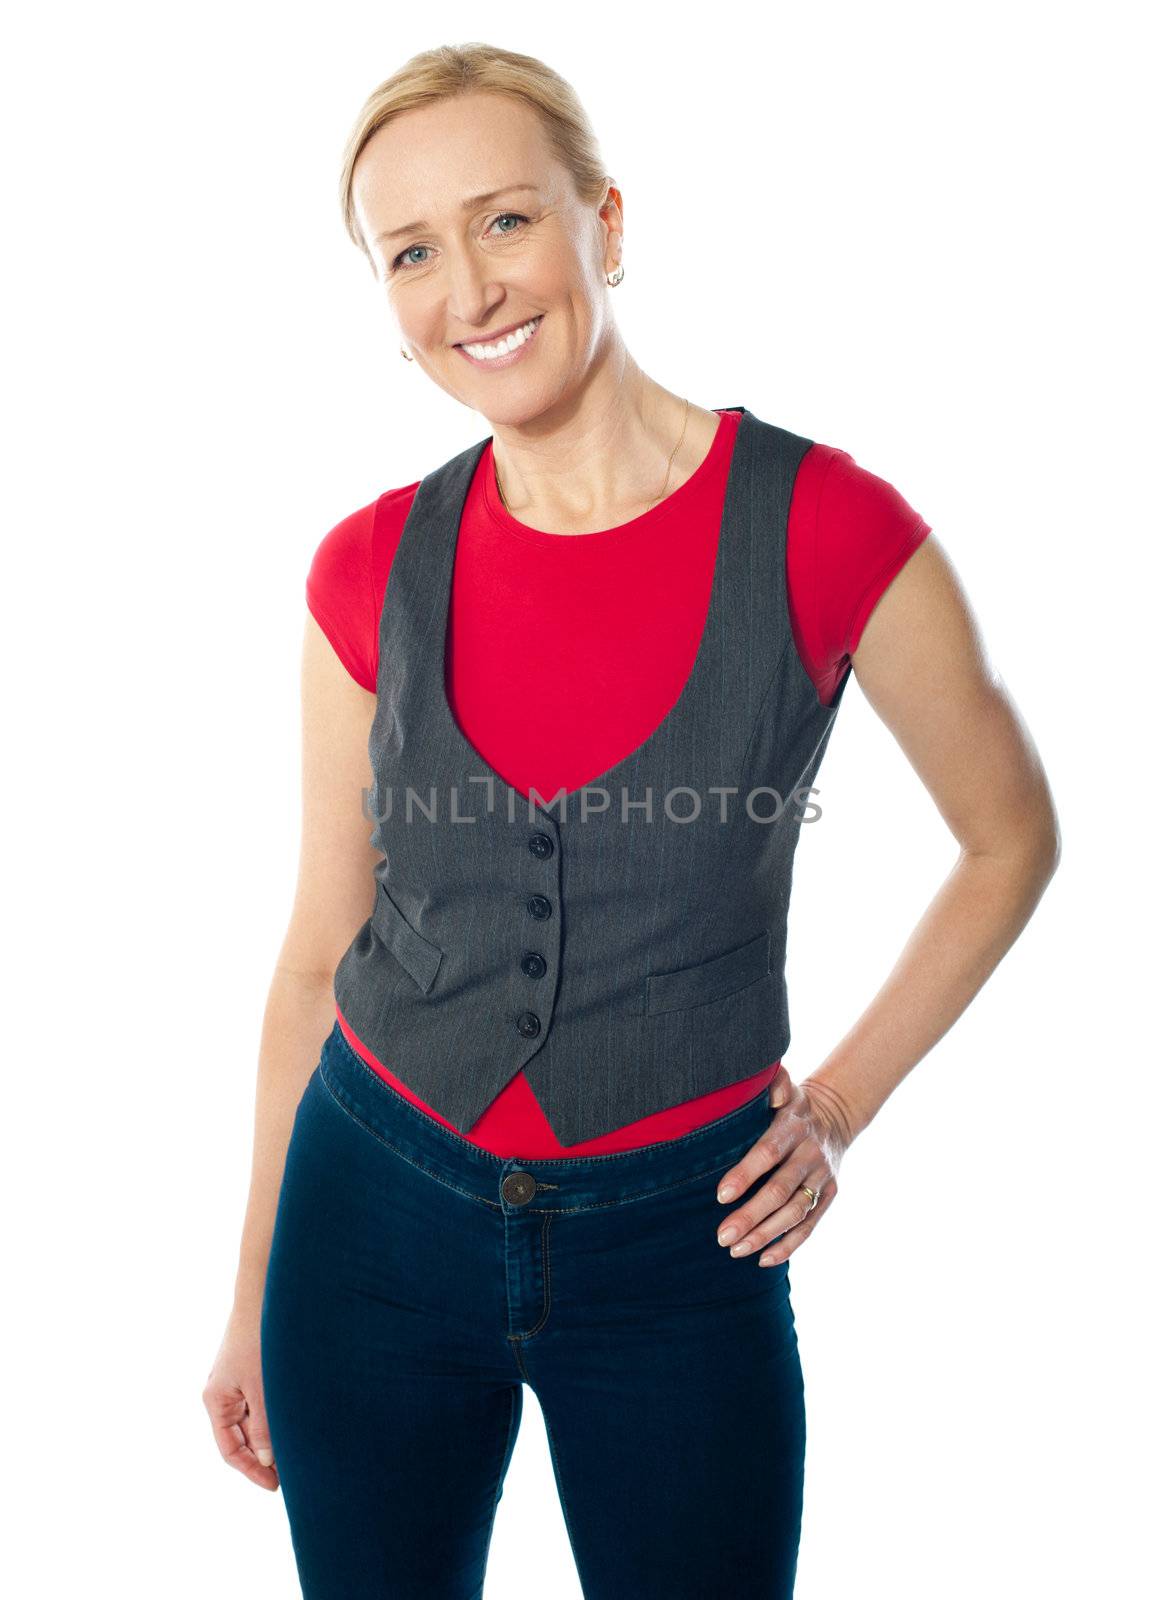 Portriat of smiling gorgeous woman in casuals standing with hand on her waist